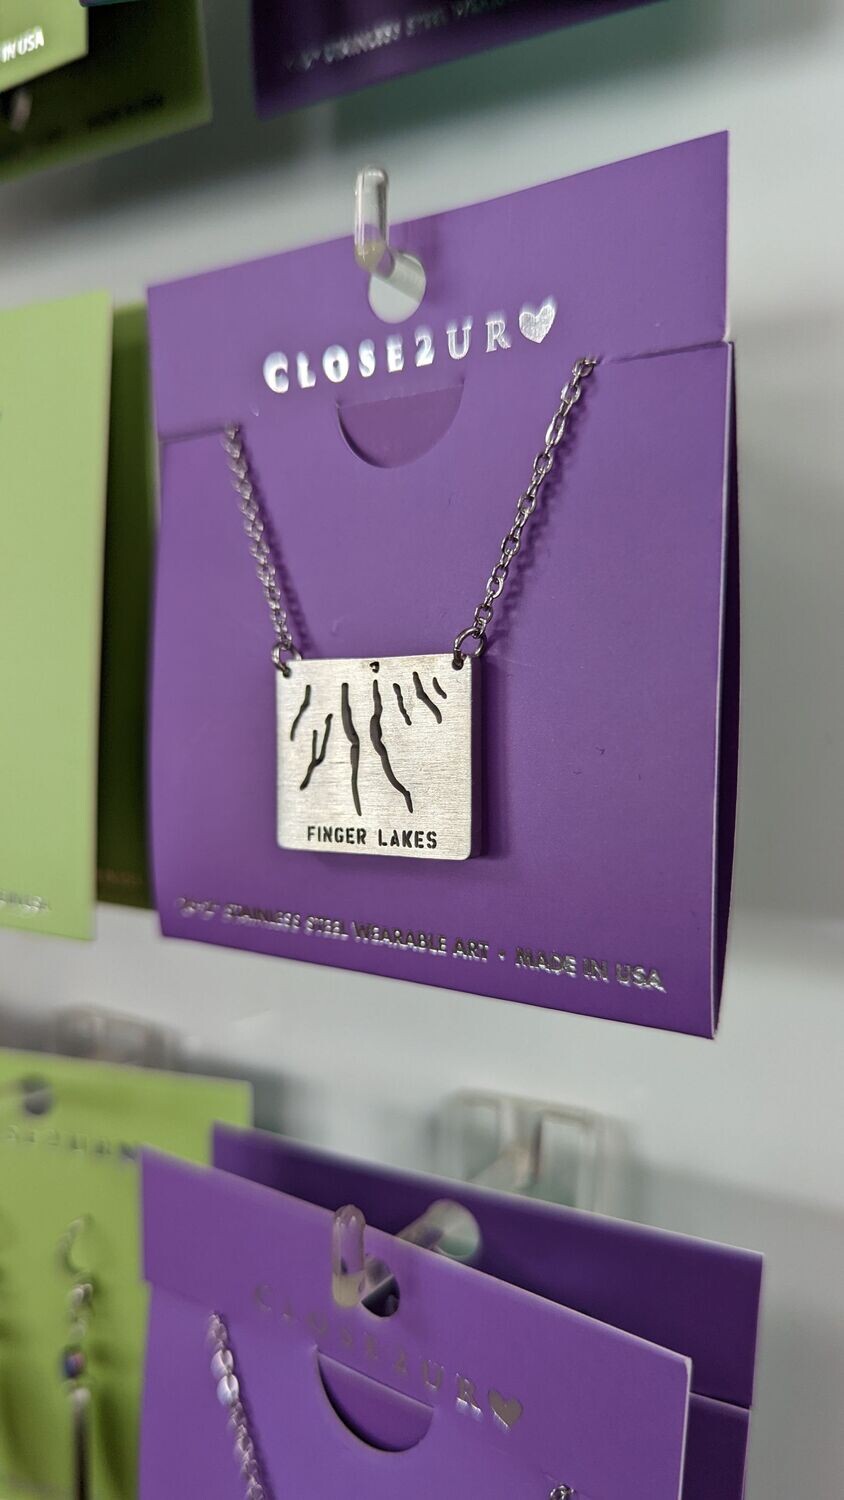 Close 2 Ur Heart Stainless Steel Necklaces - Finger Lakes and Keuka Lake